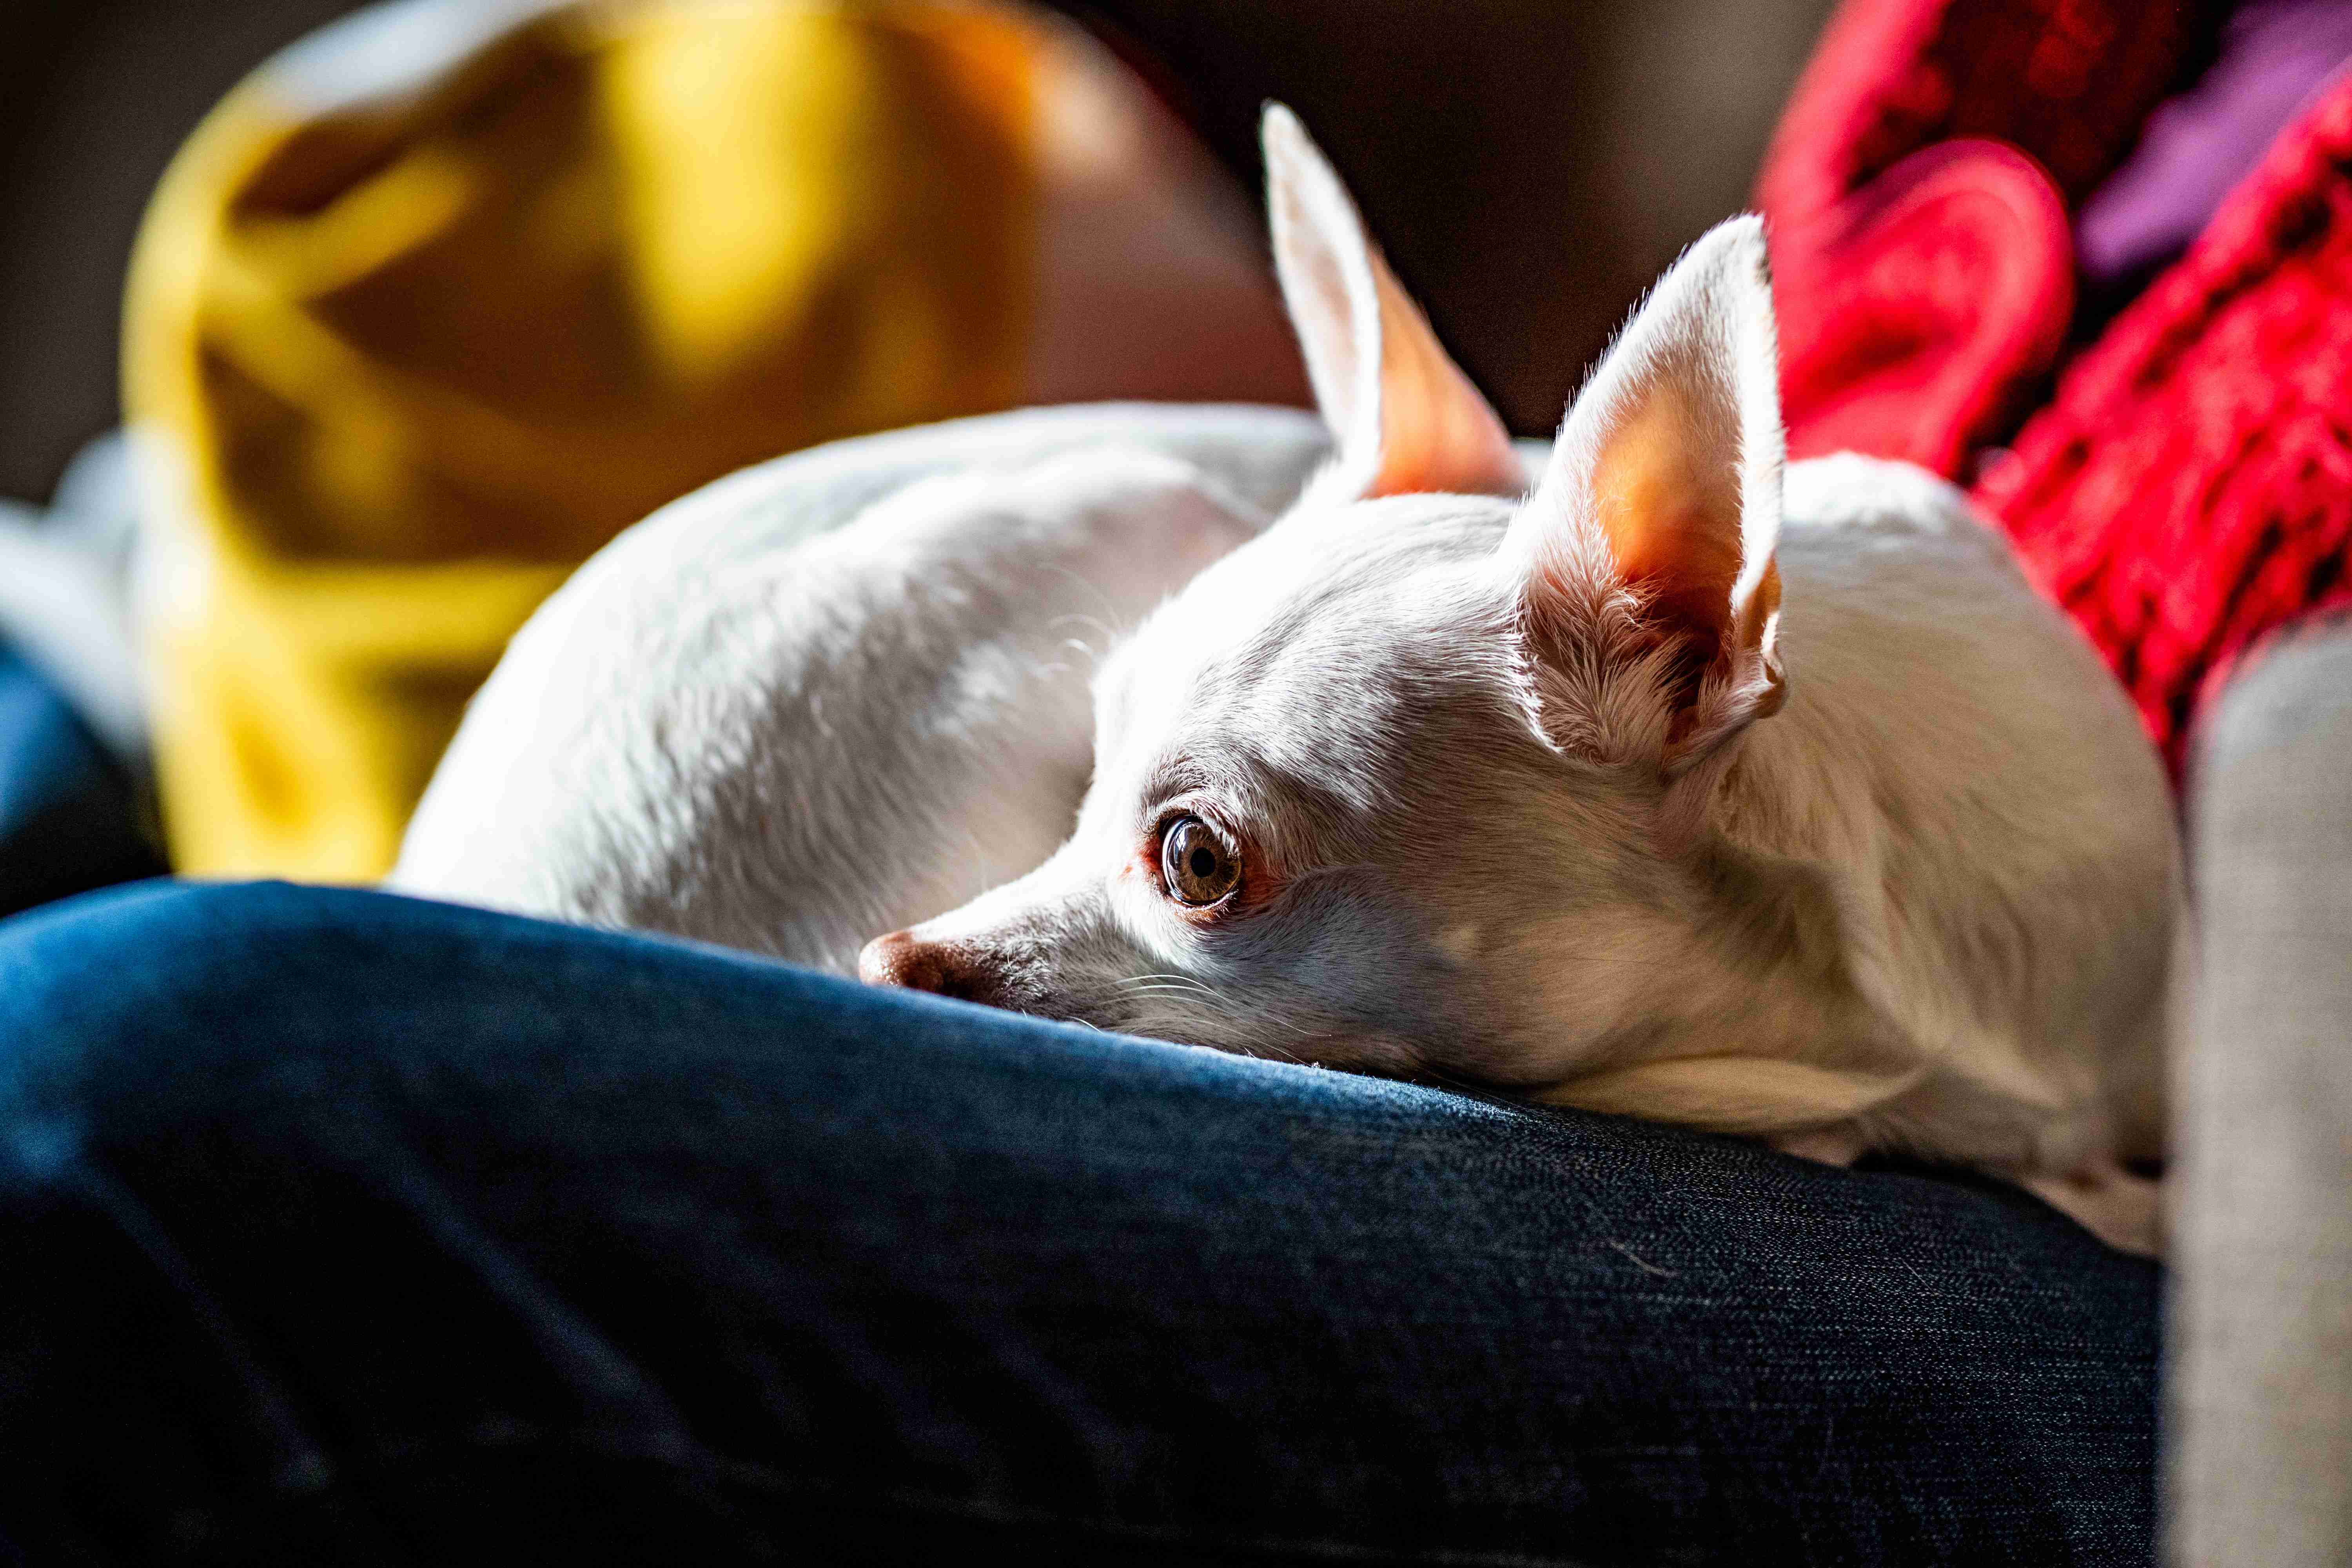 Can Chihuahuas become aggressive towards their owners when they are feeling stressed or overwhelmed?